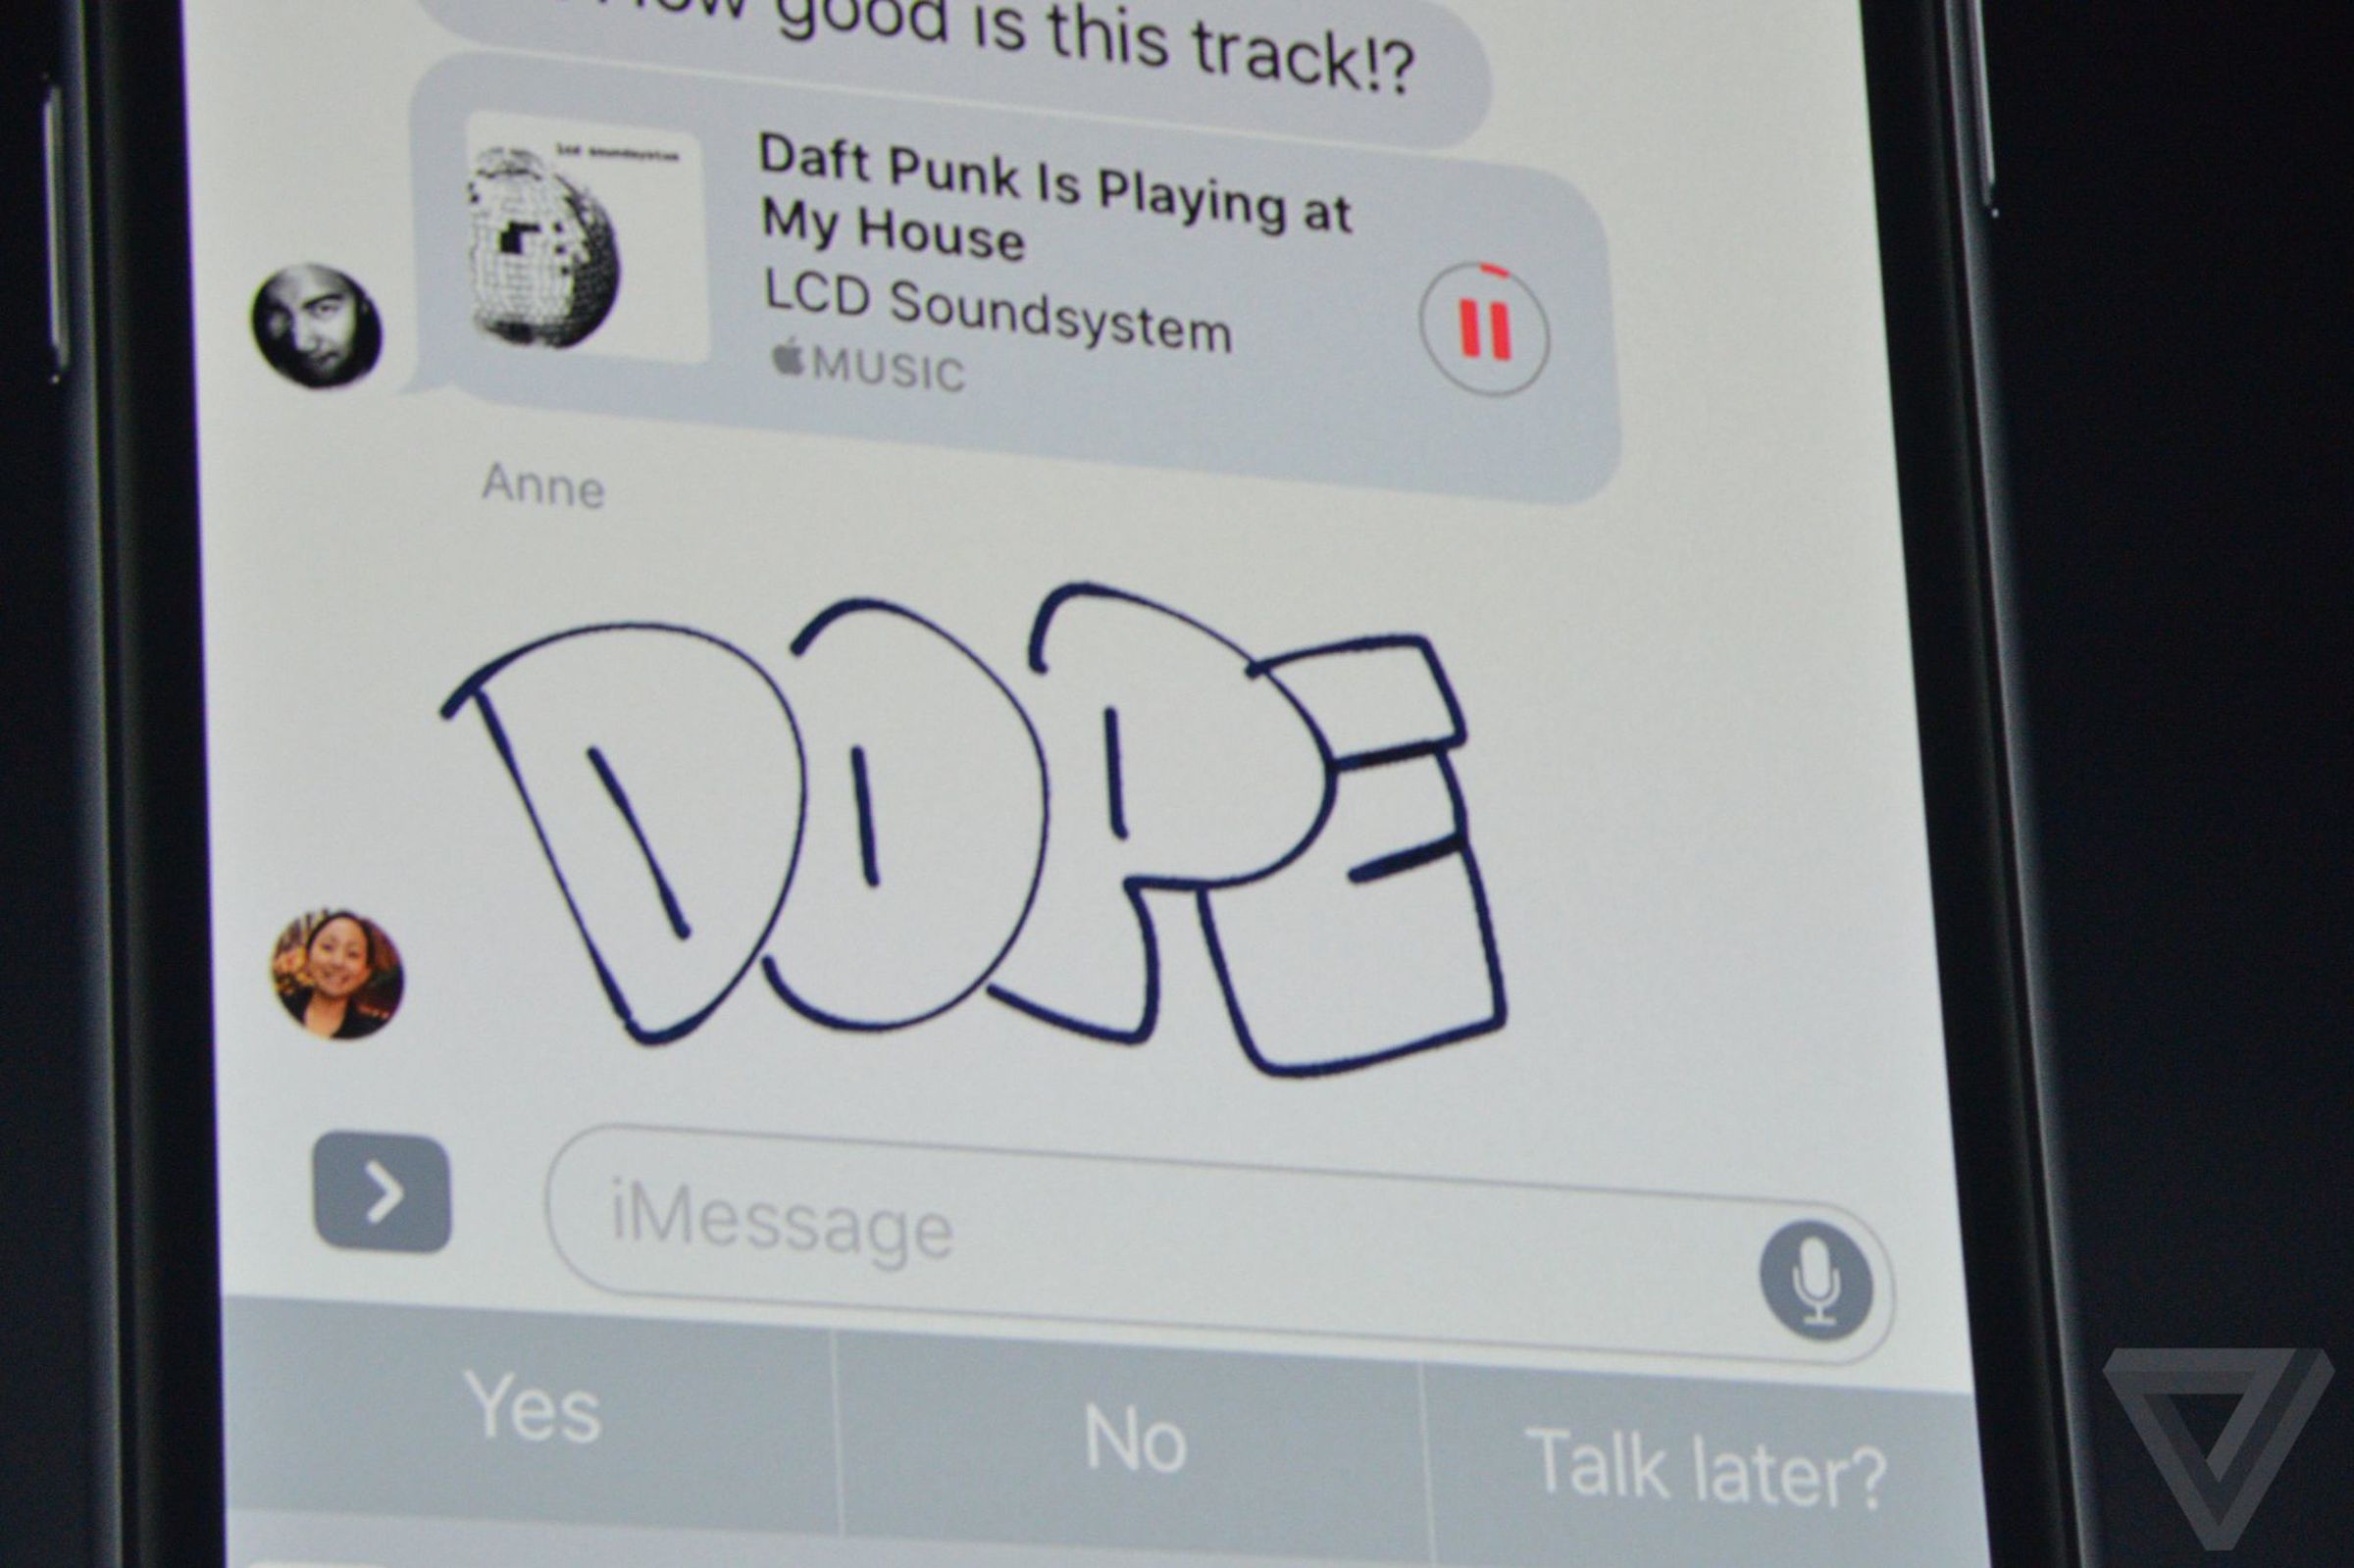 Messages at WWDC16 announcement photos